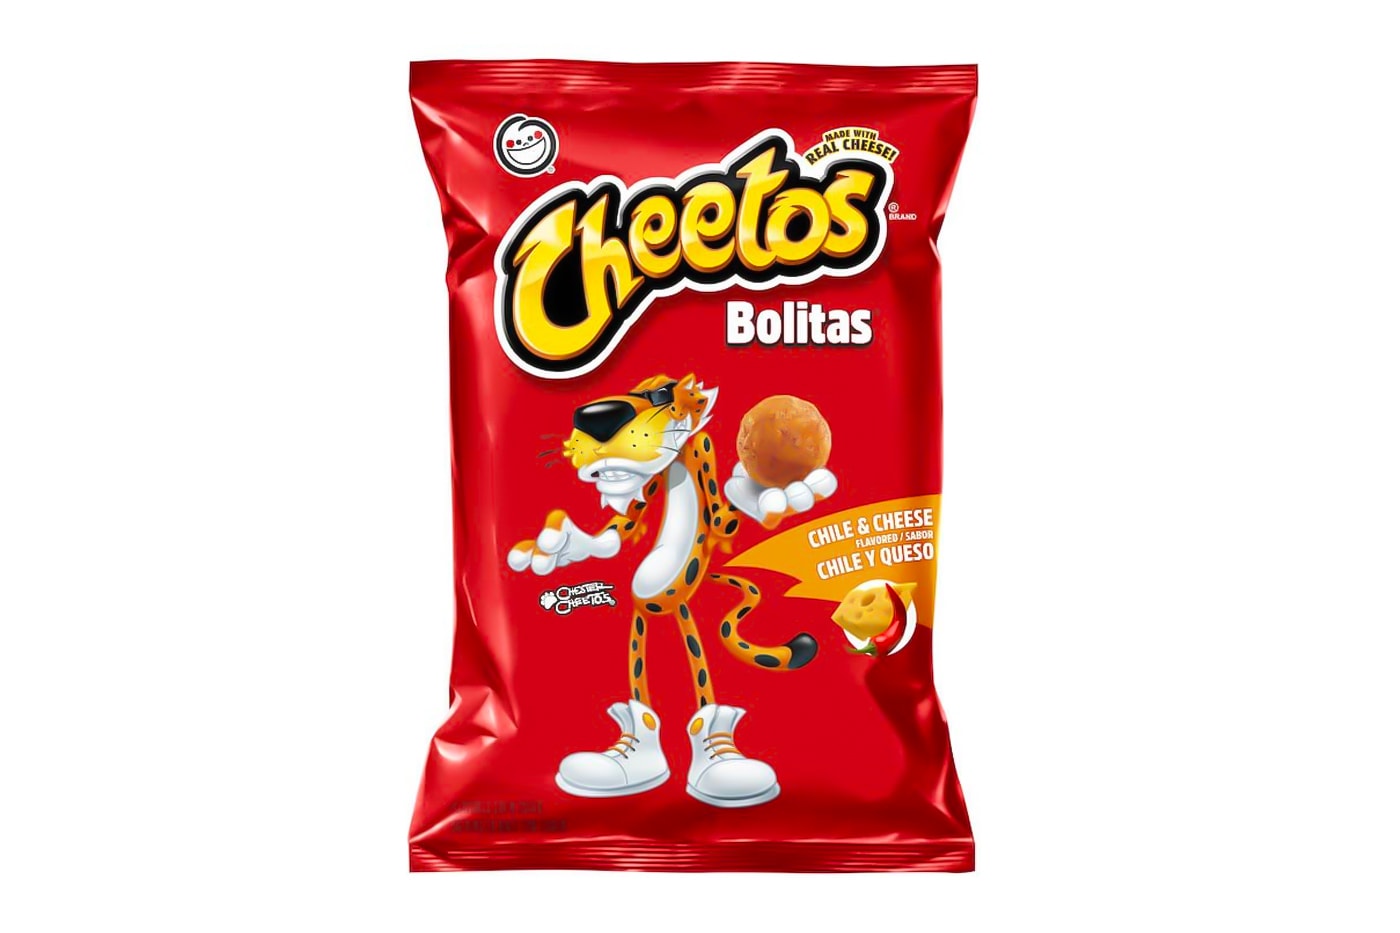 Frito-Lay Cheetos Bolitas United States Official Debut Info Taste Review Chile & Cheese 